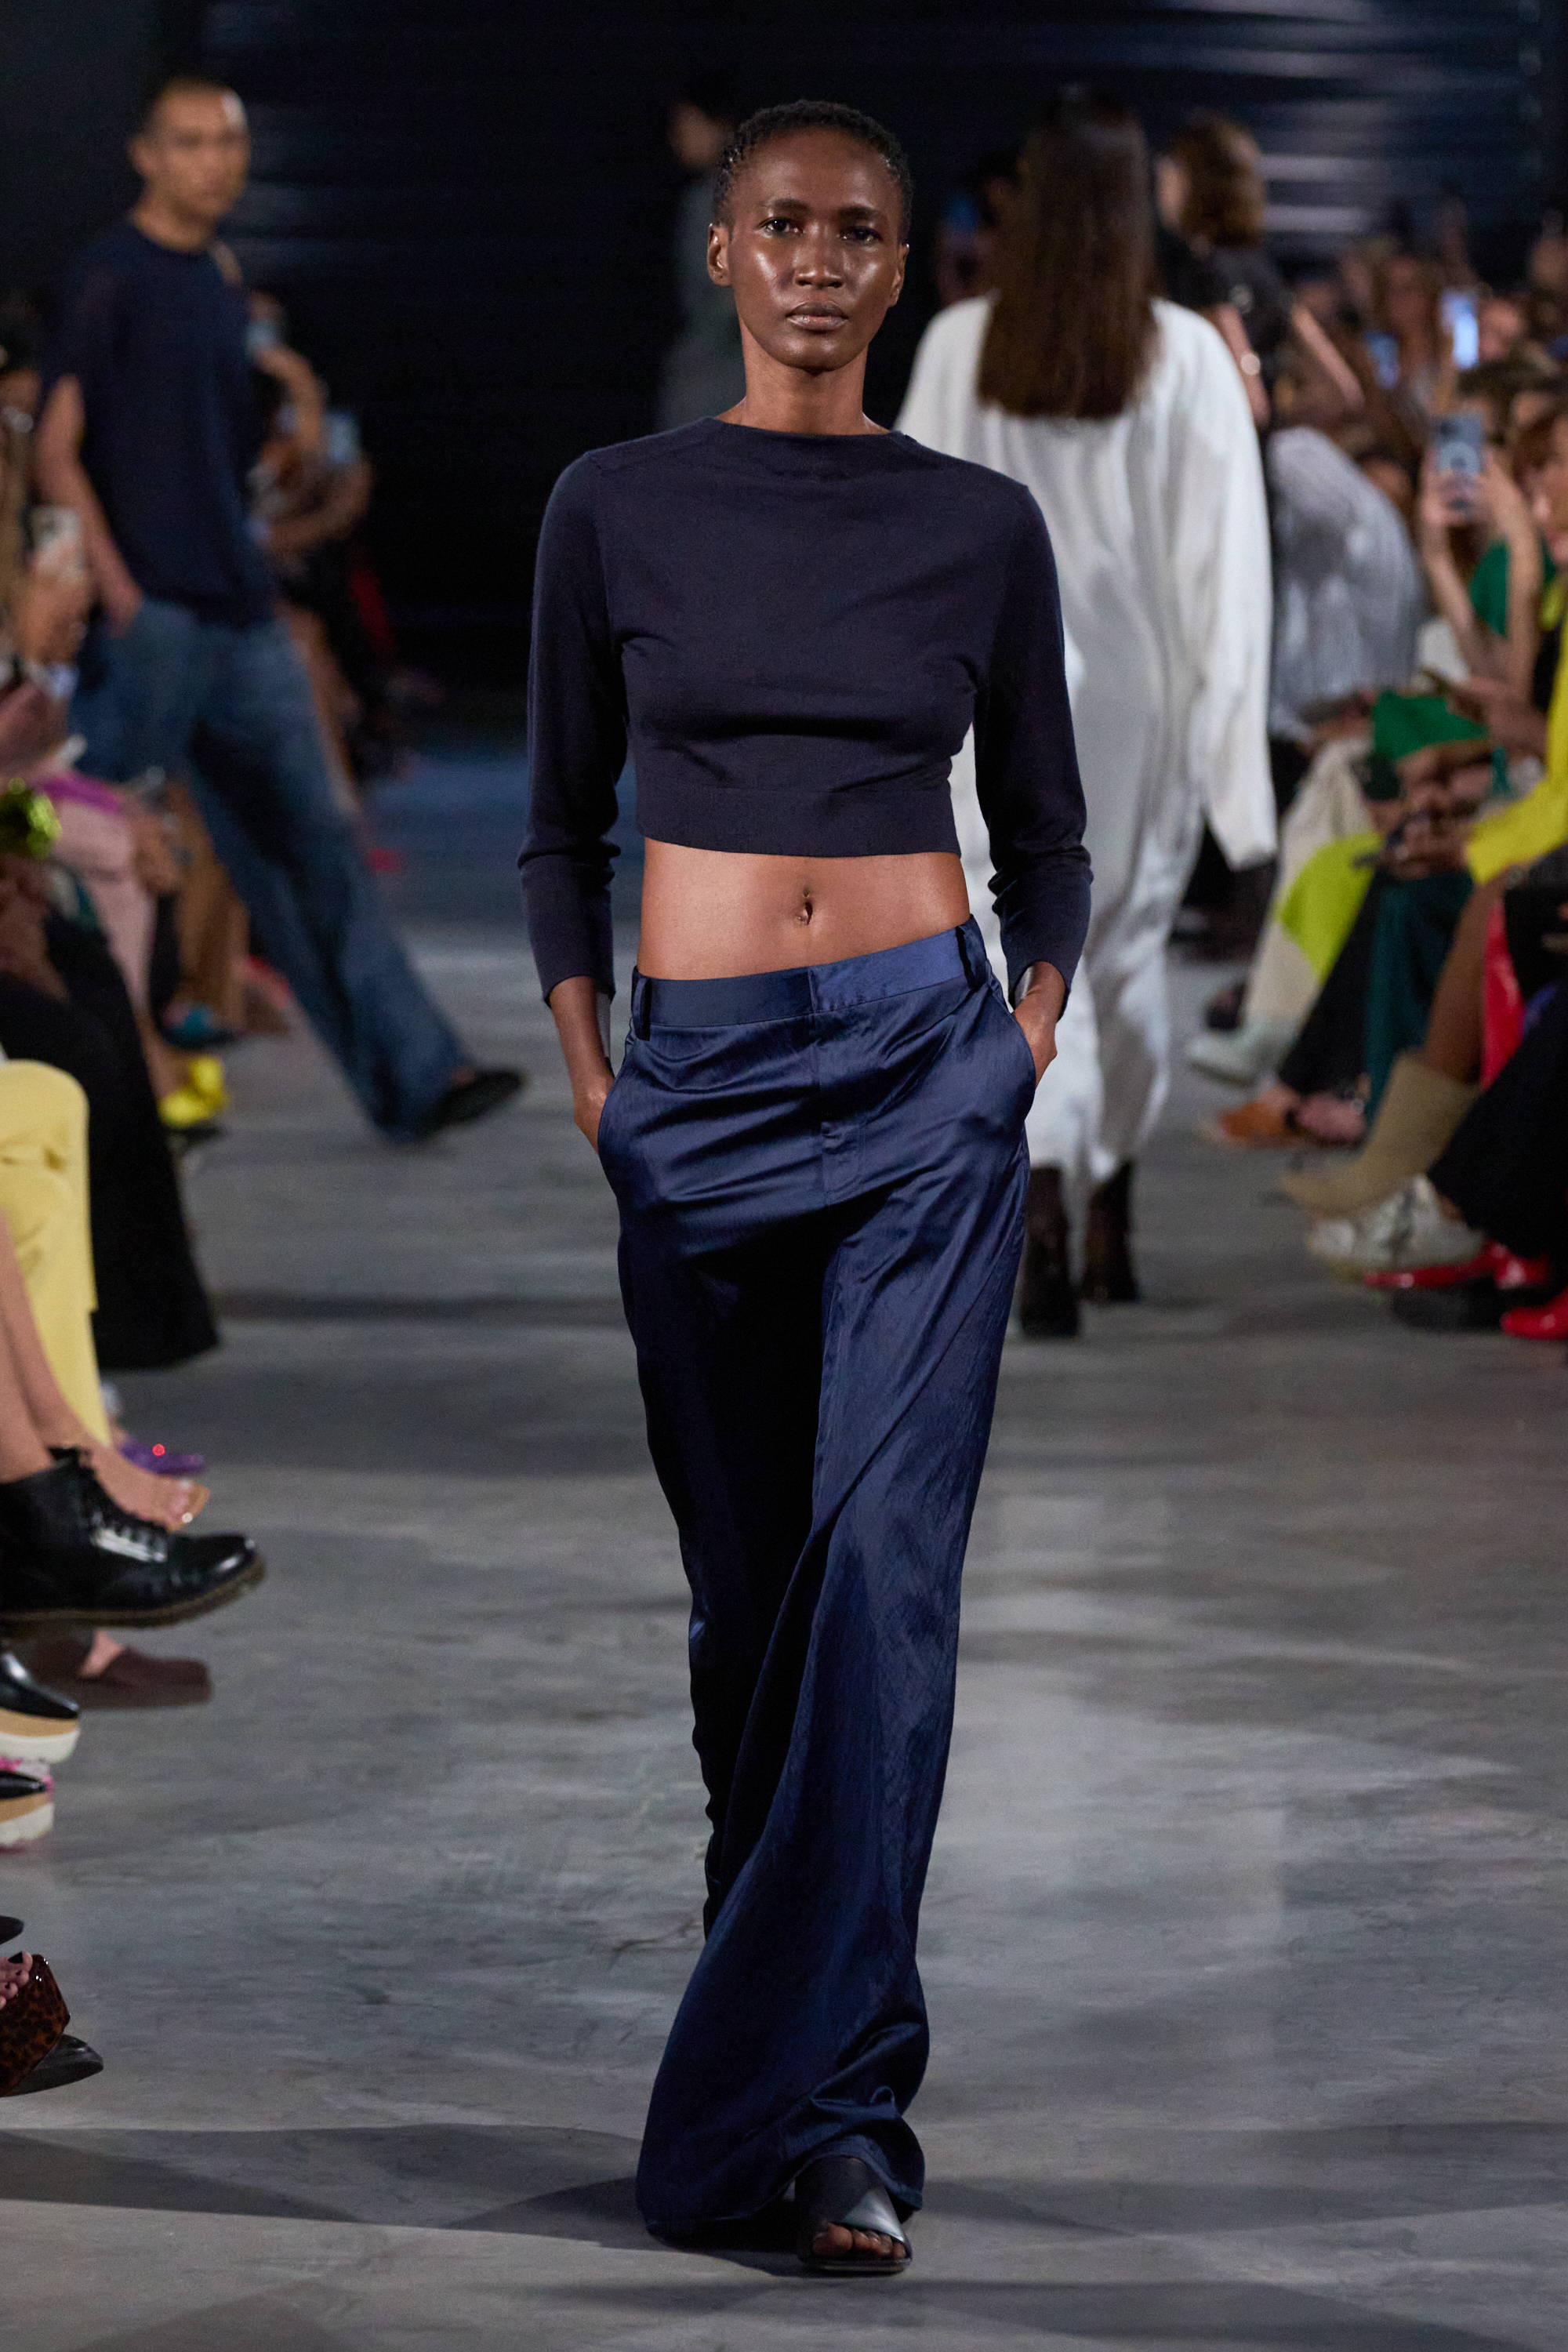 Model on a runway wearing crop sweater and shiny pants